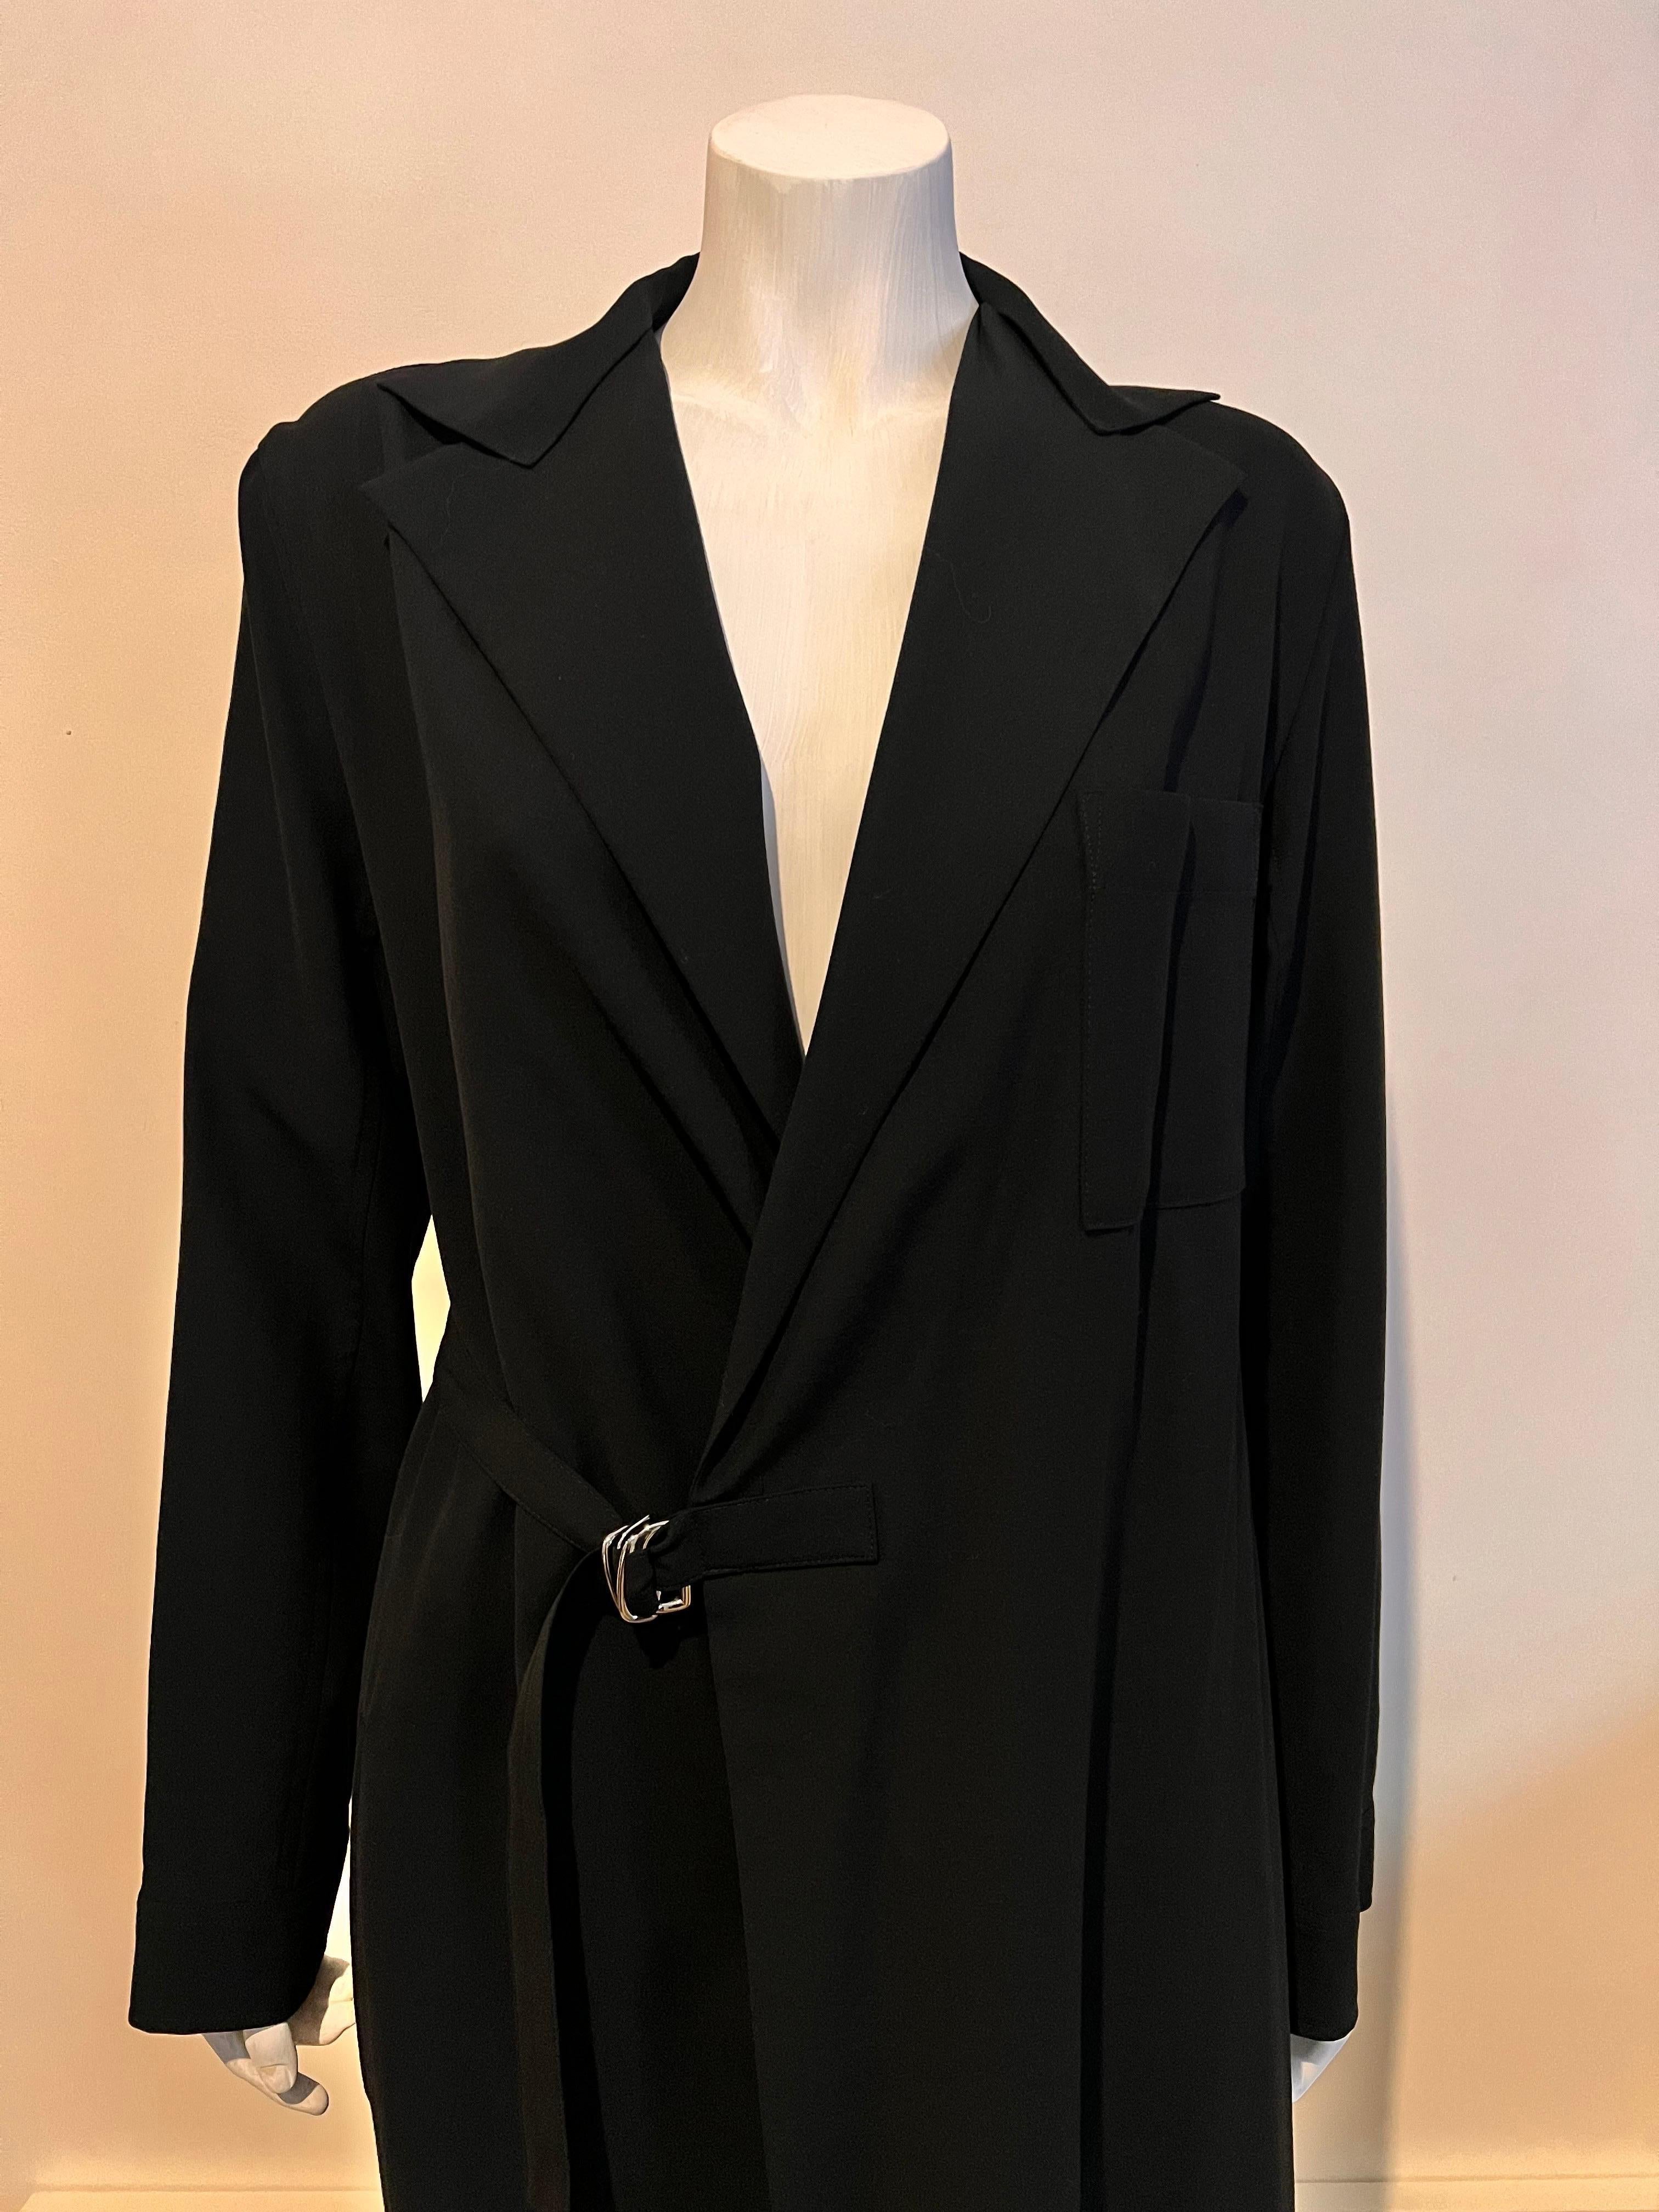 Vintage 1990’s Y’s by Yohji Yamamoto long line unstructured jacket/coat with buckle tie detail closure, also press studded closing to lower section

Sophisticated style in a truly timeless silhouette and shape 

Size Medium but would fit multiple